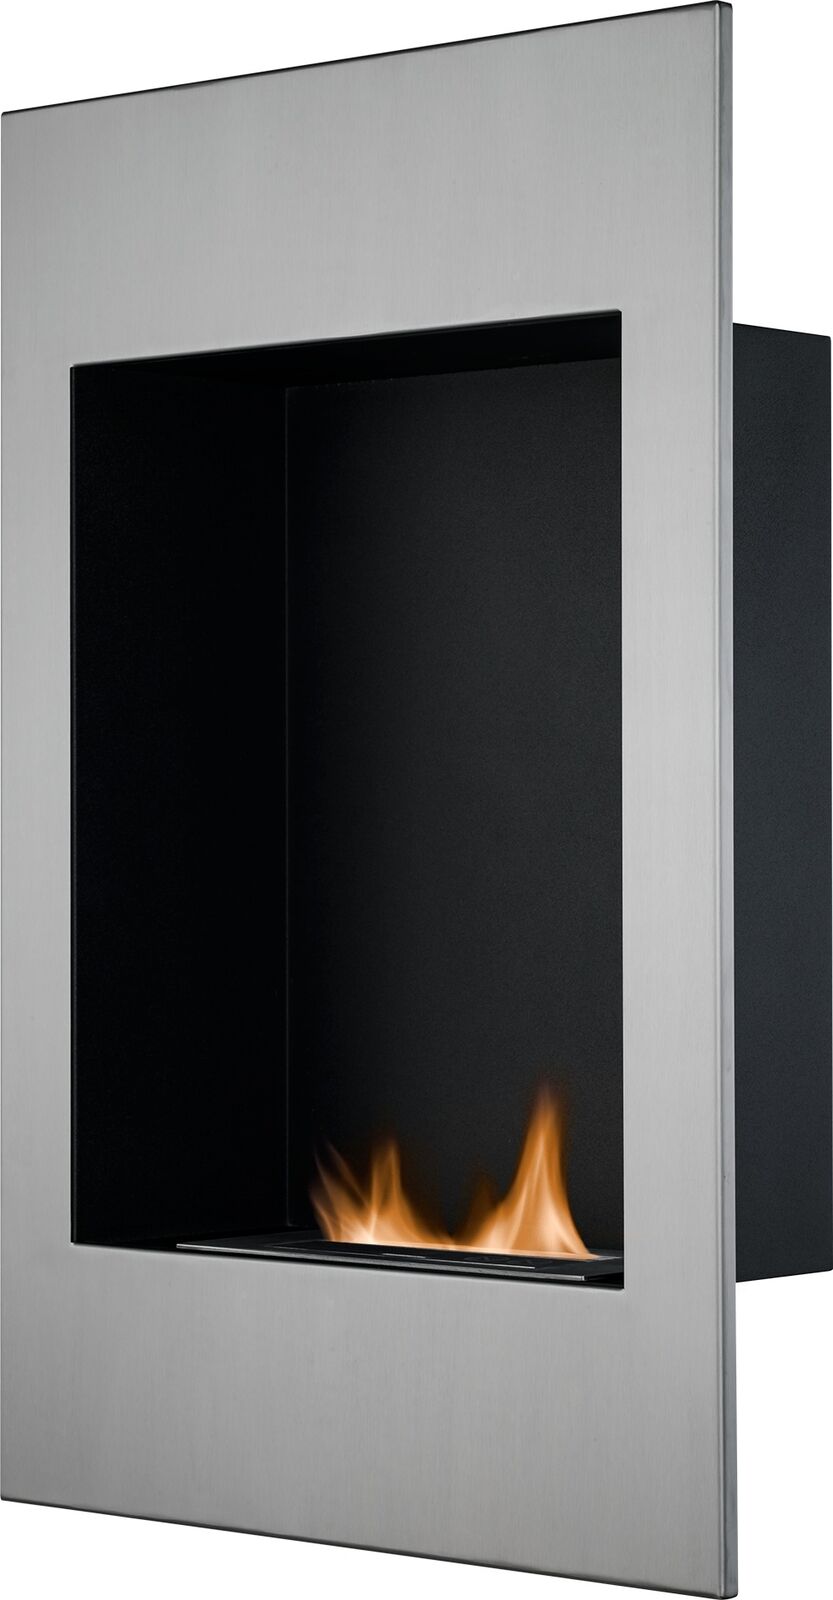 Ethanol Wall Mounted Fireplace Lovely Adam the Alexis Wall Mounted Bio Ethanol Fire In Stainless Steel 20 Inch